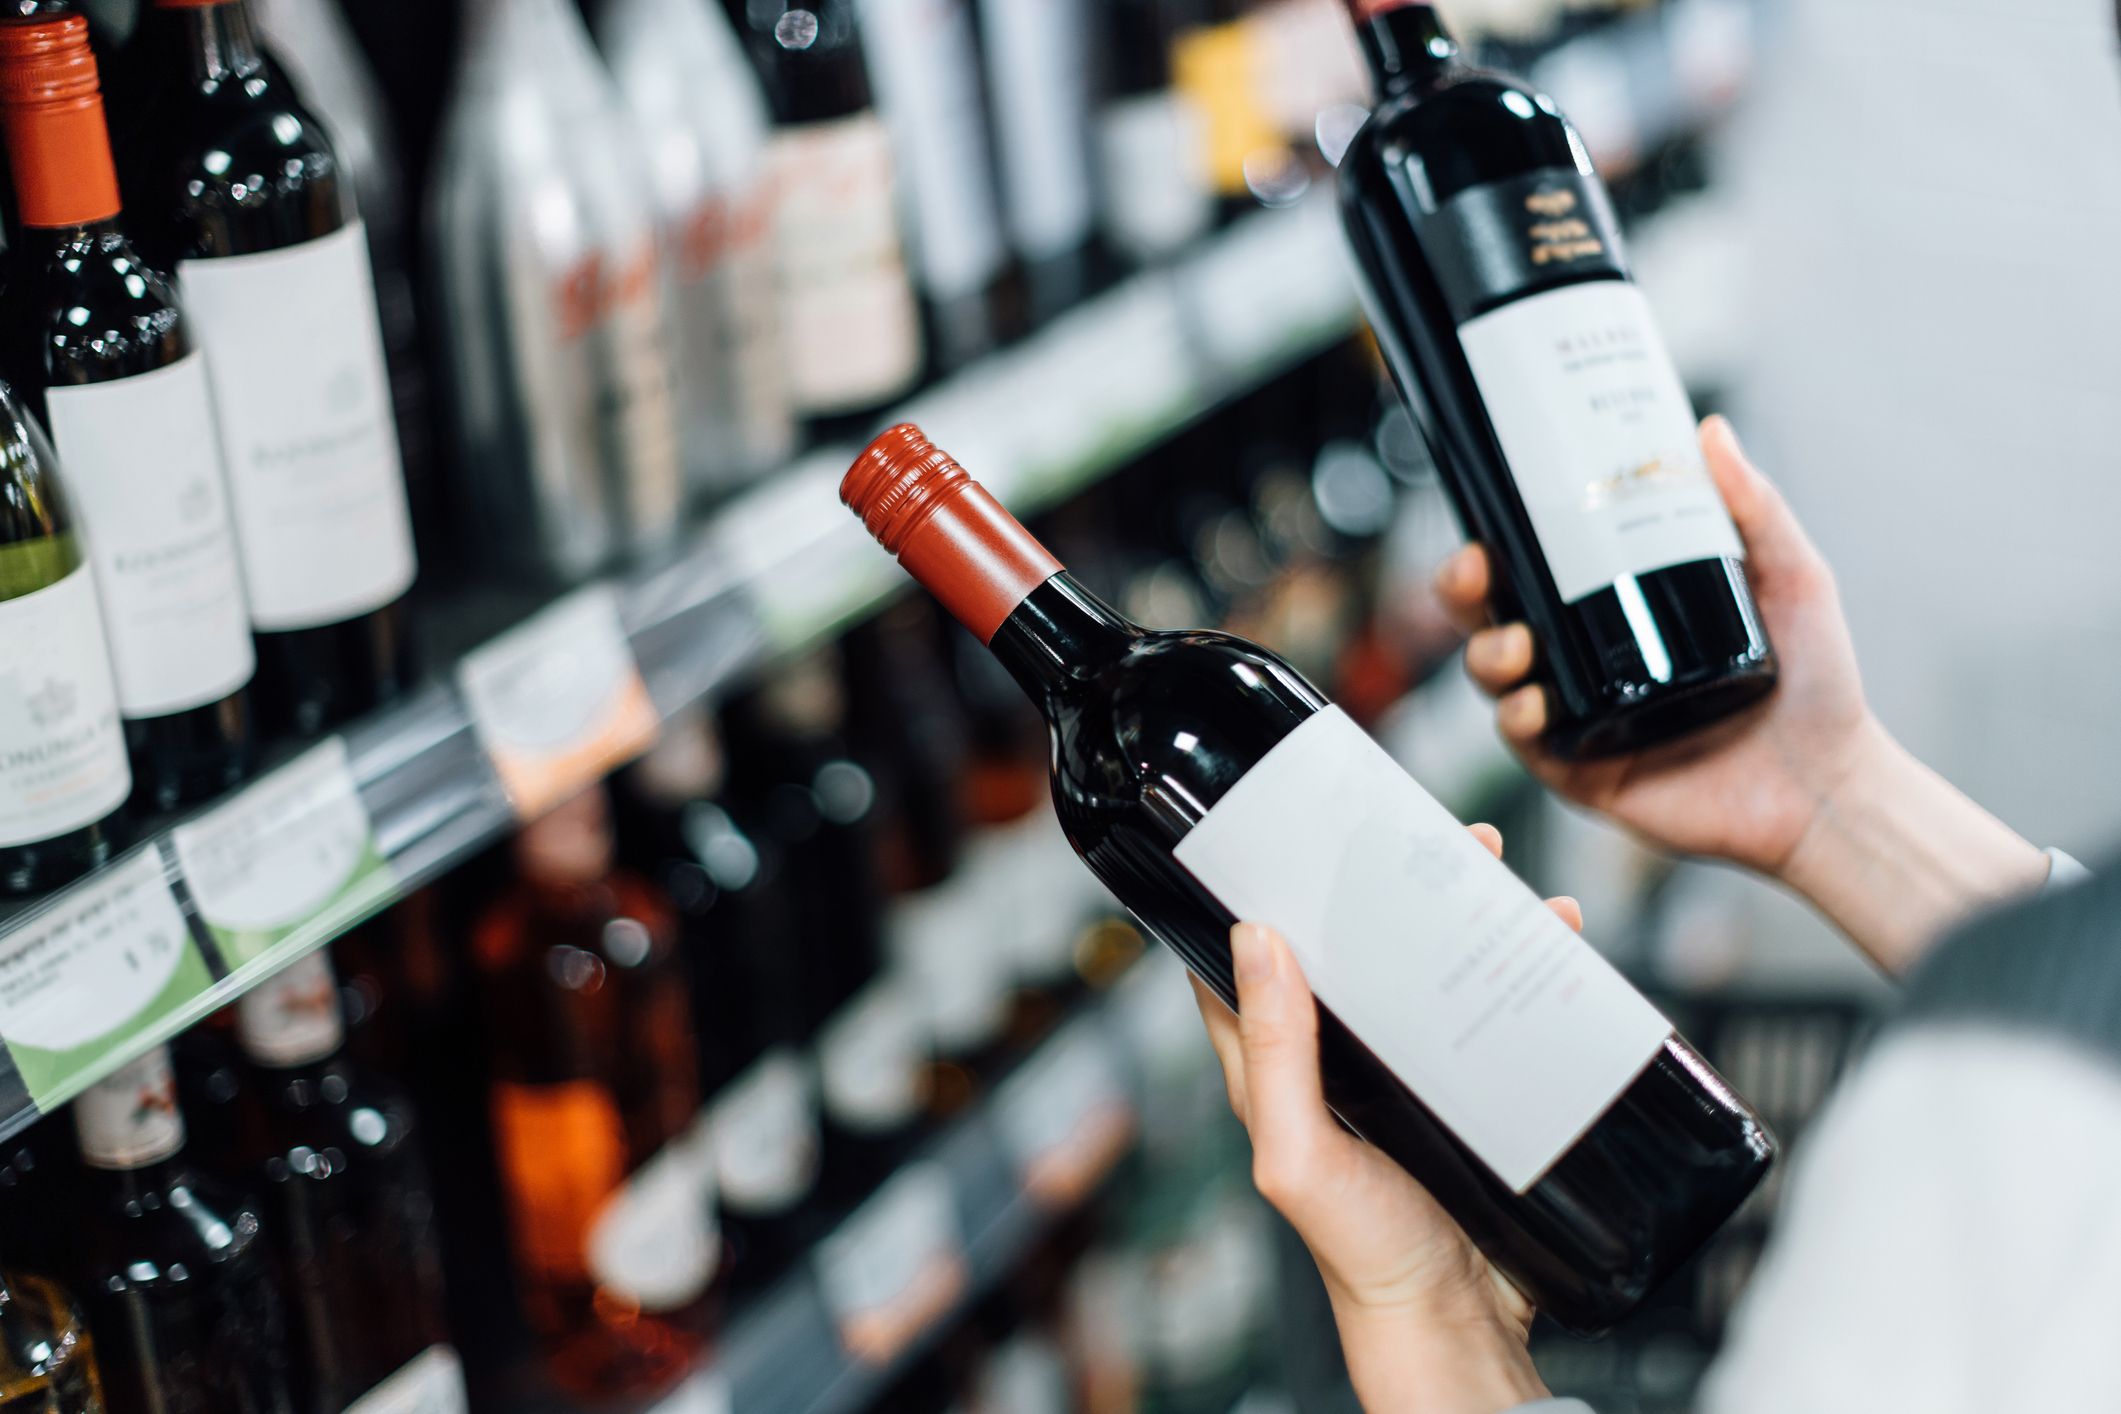 Prices that'll make you hit the bottle - The rich are splurging on